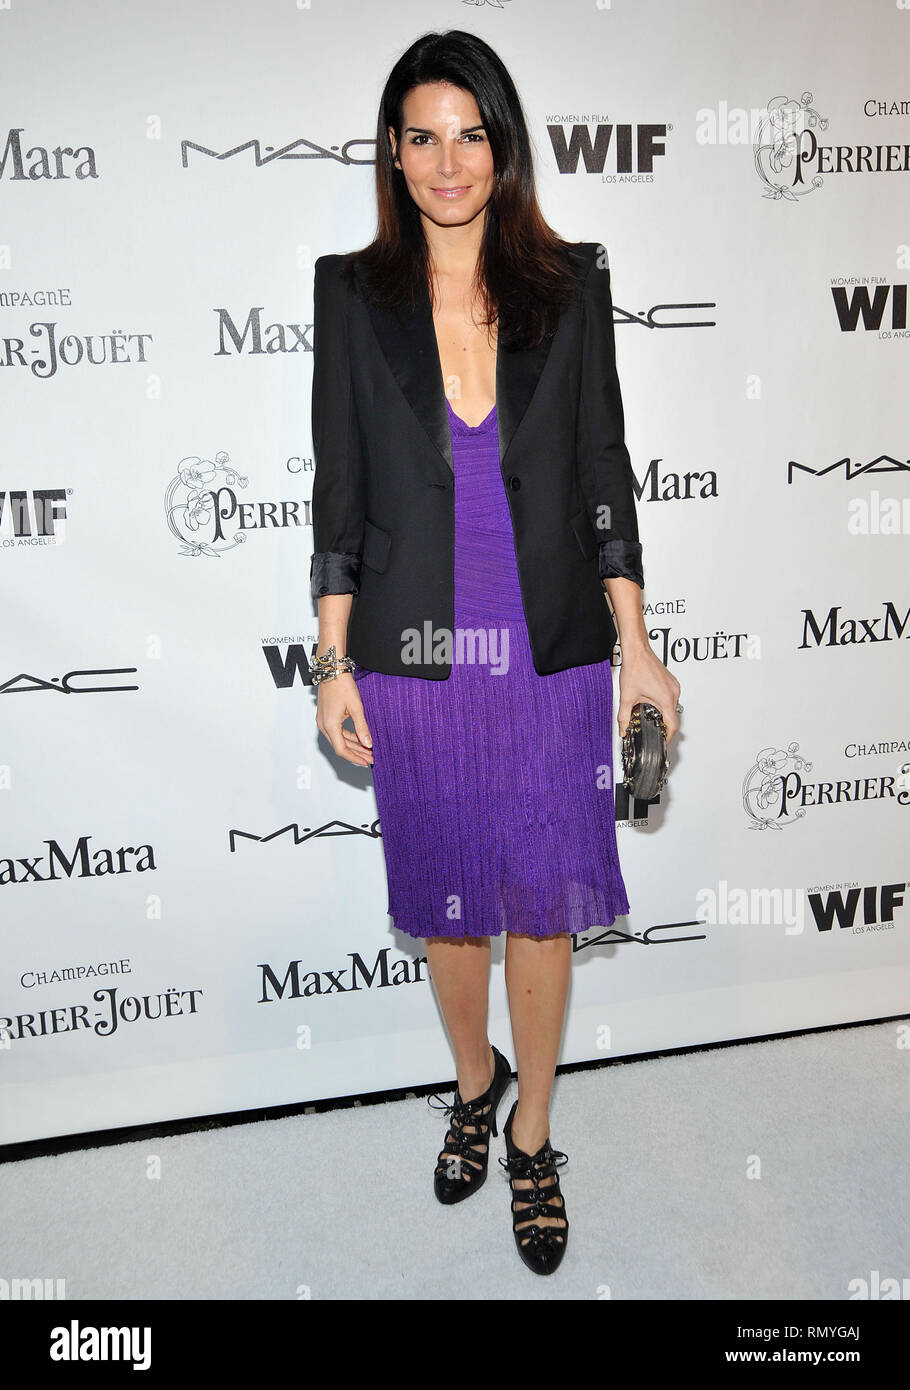 Angie Harmon 11 - Women In Film - WIF -Pre Oscars Cocktail Party at ...